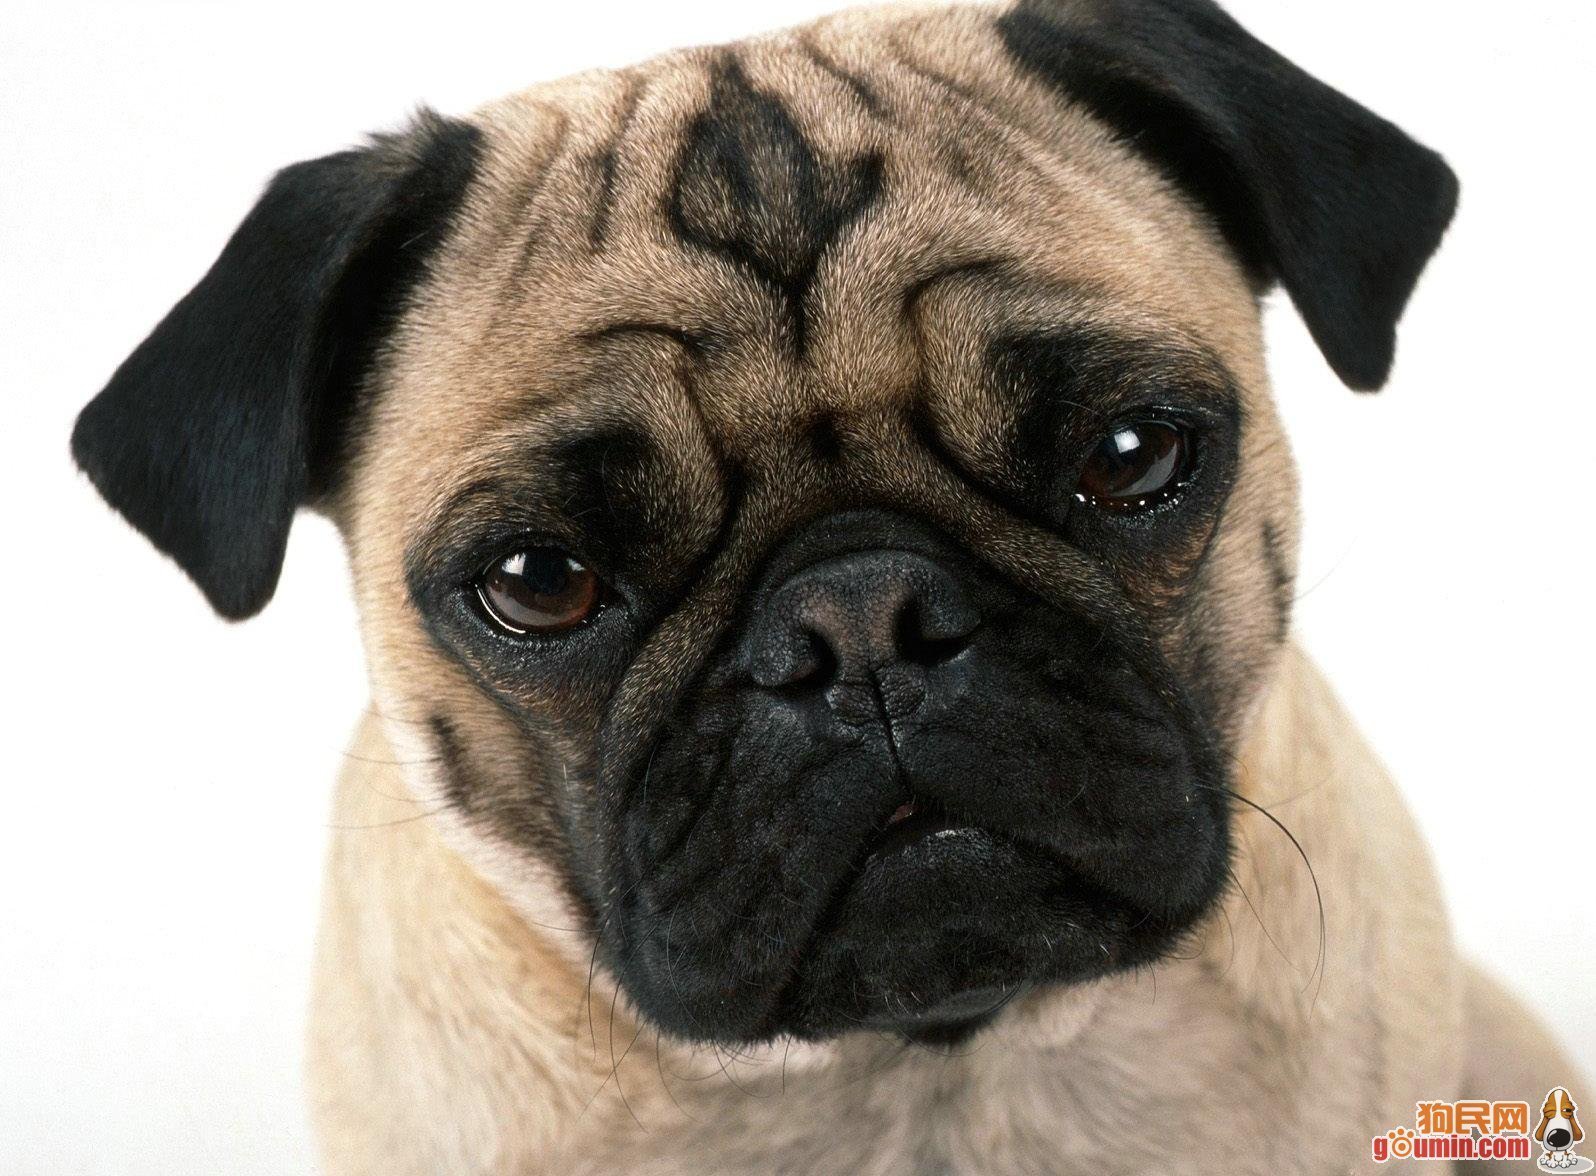 Pictures Of Pugs 59